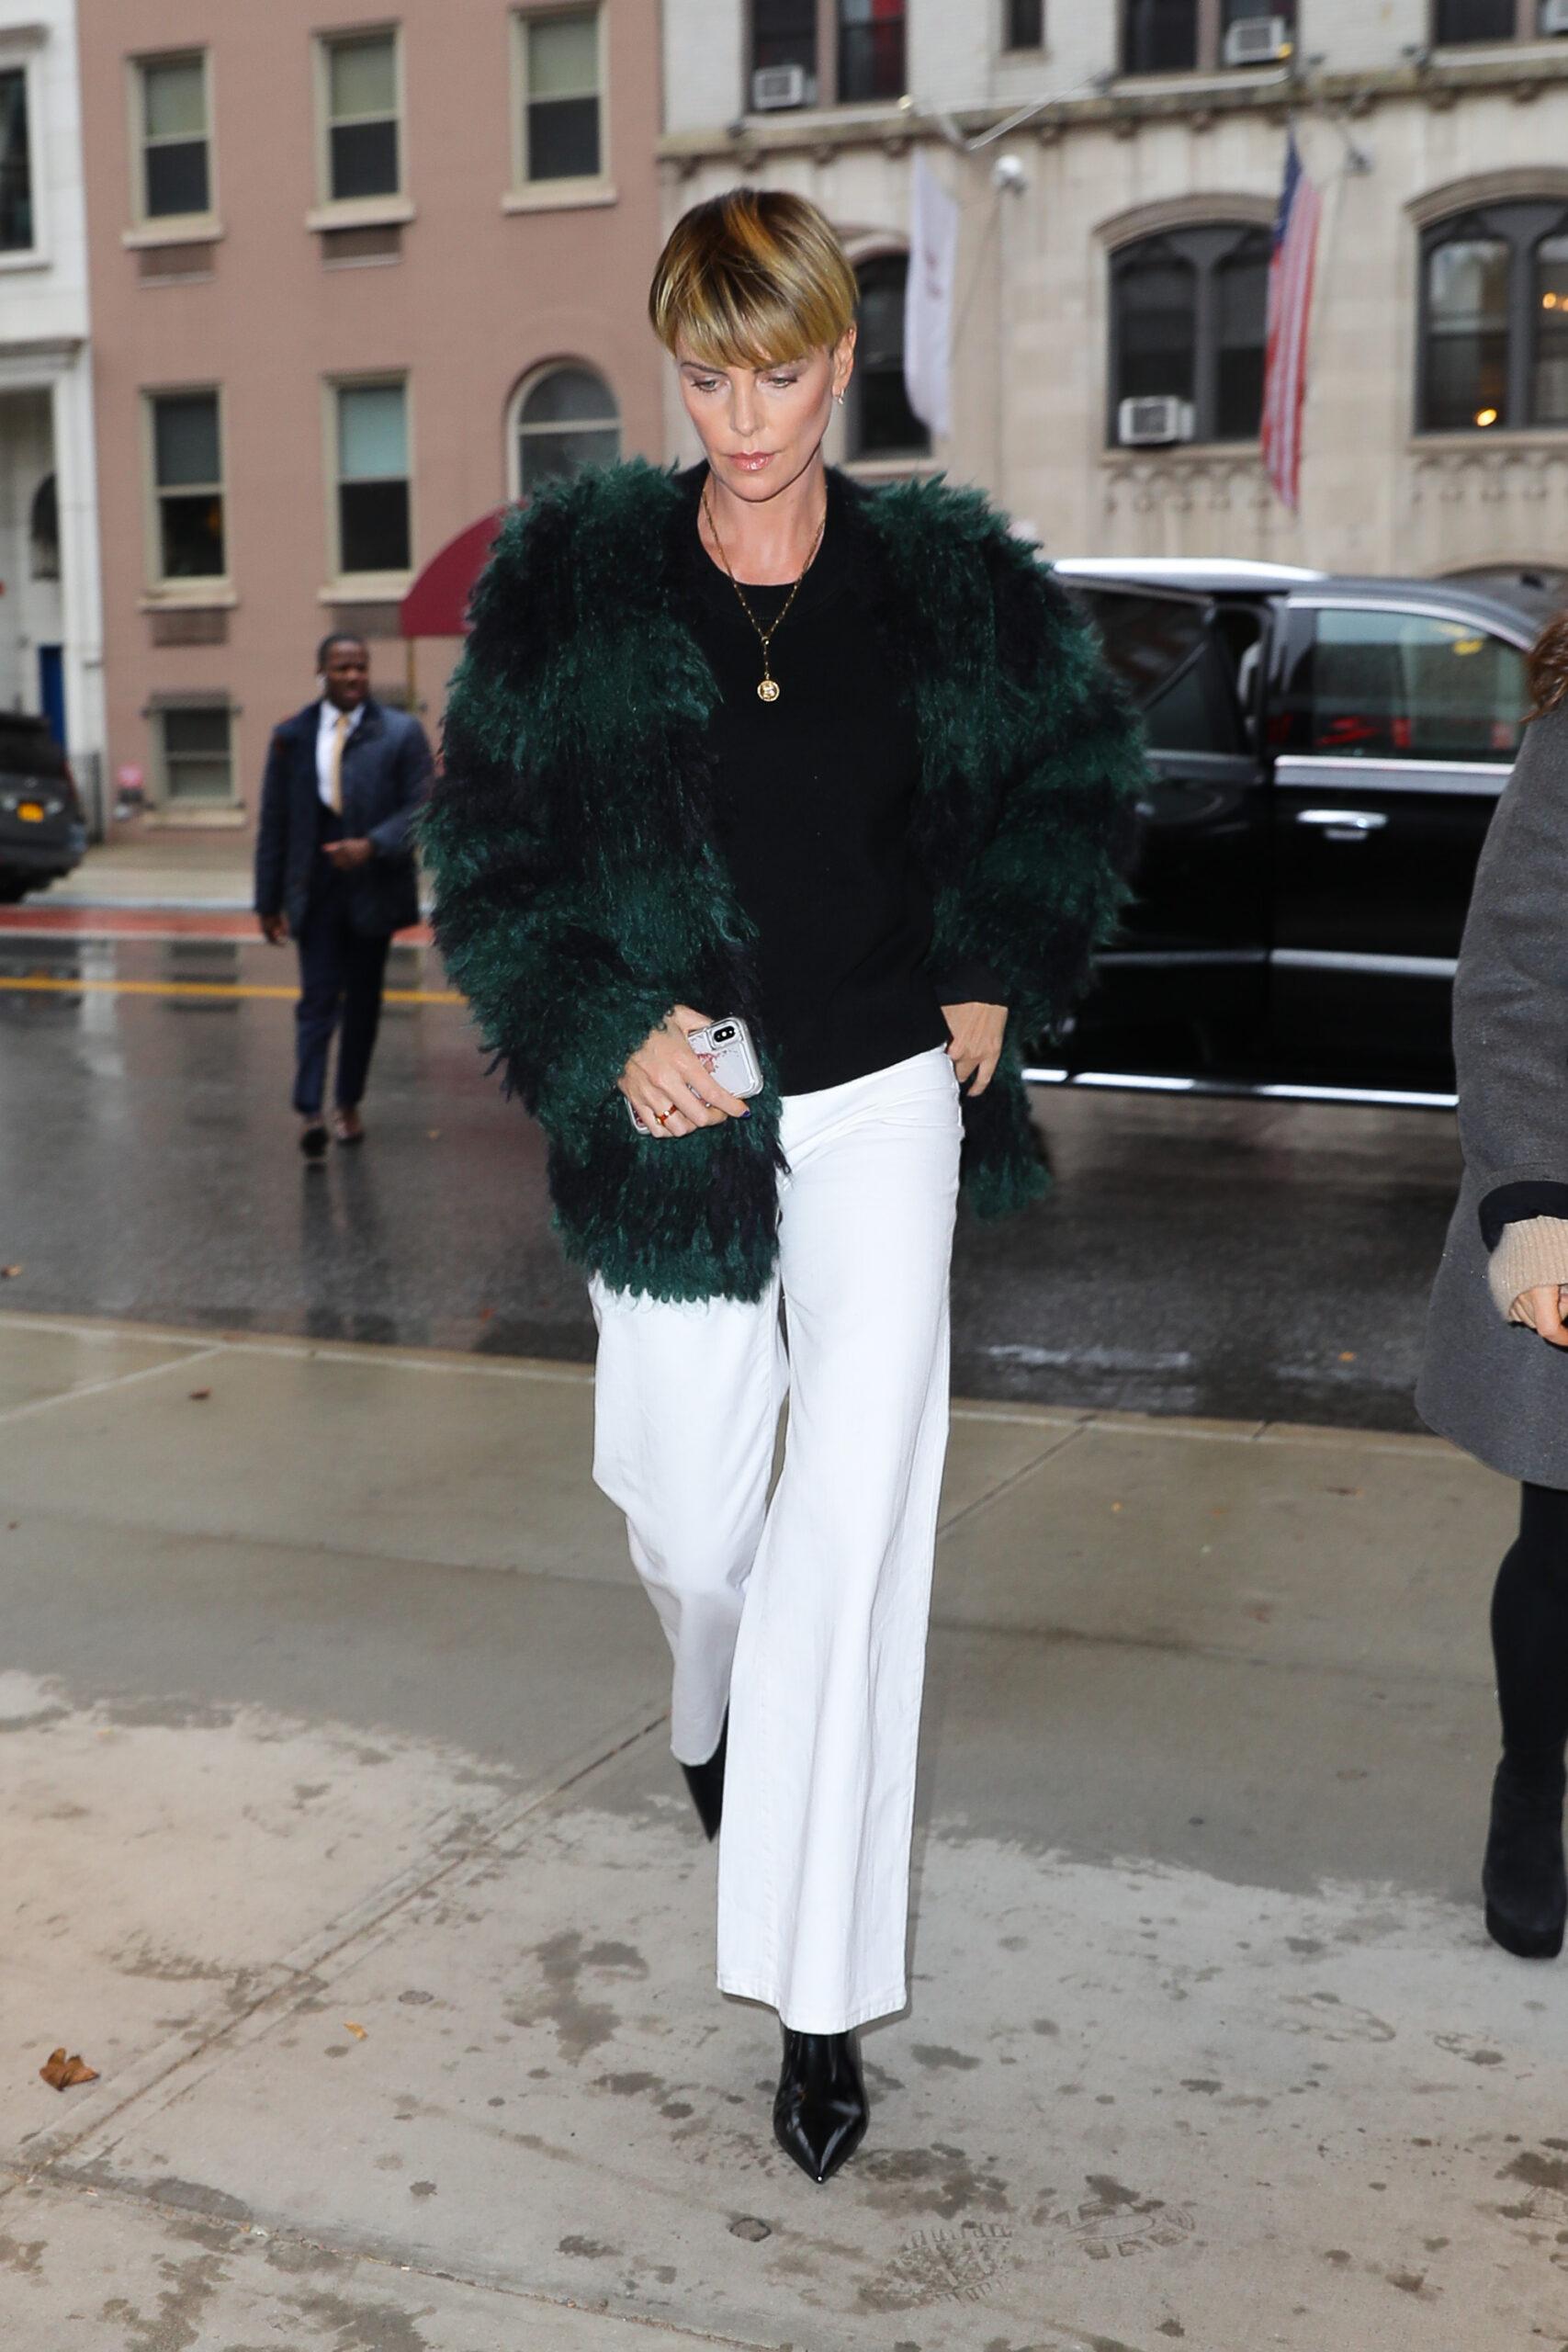 Charlize Theron was spotted out and abut in NYC on Oct 20 2019